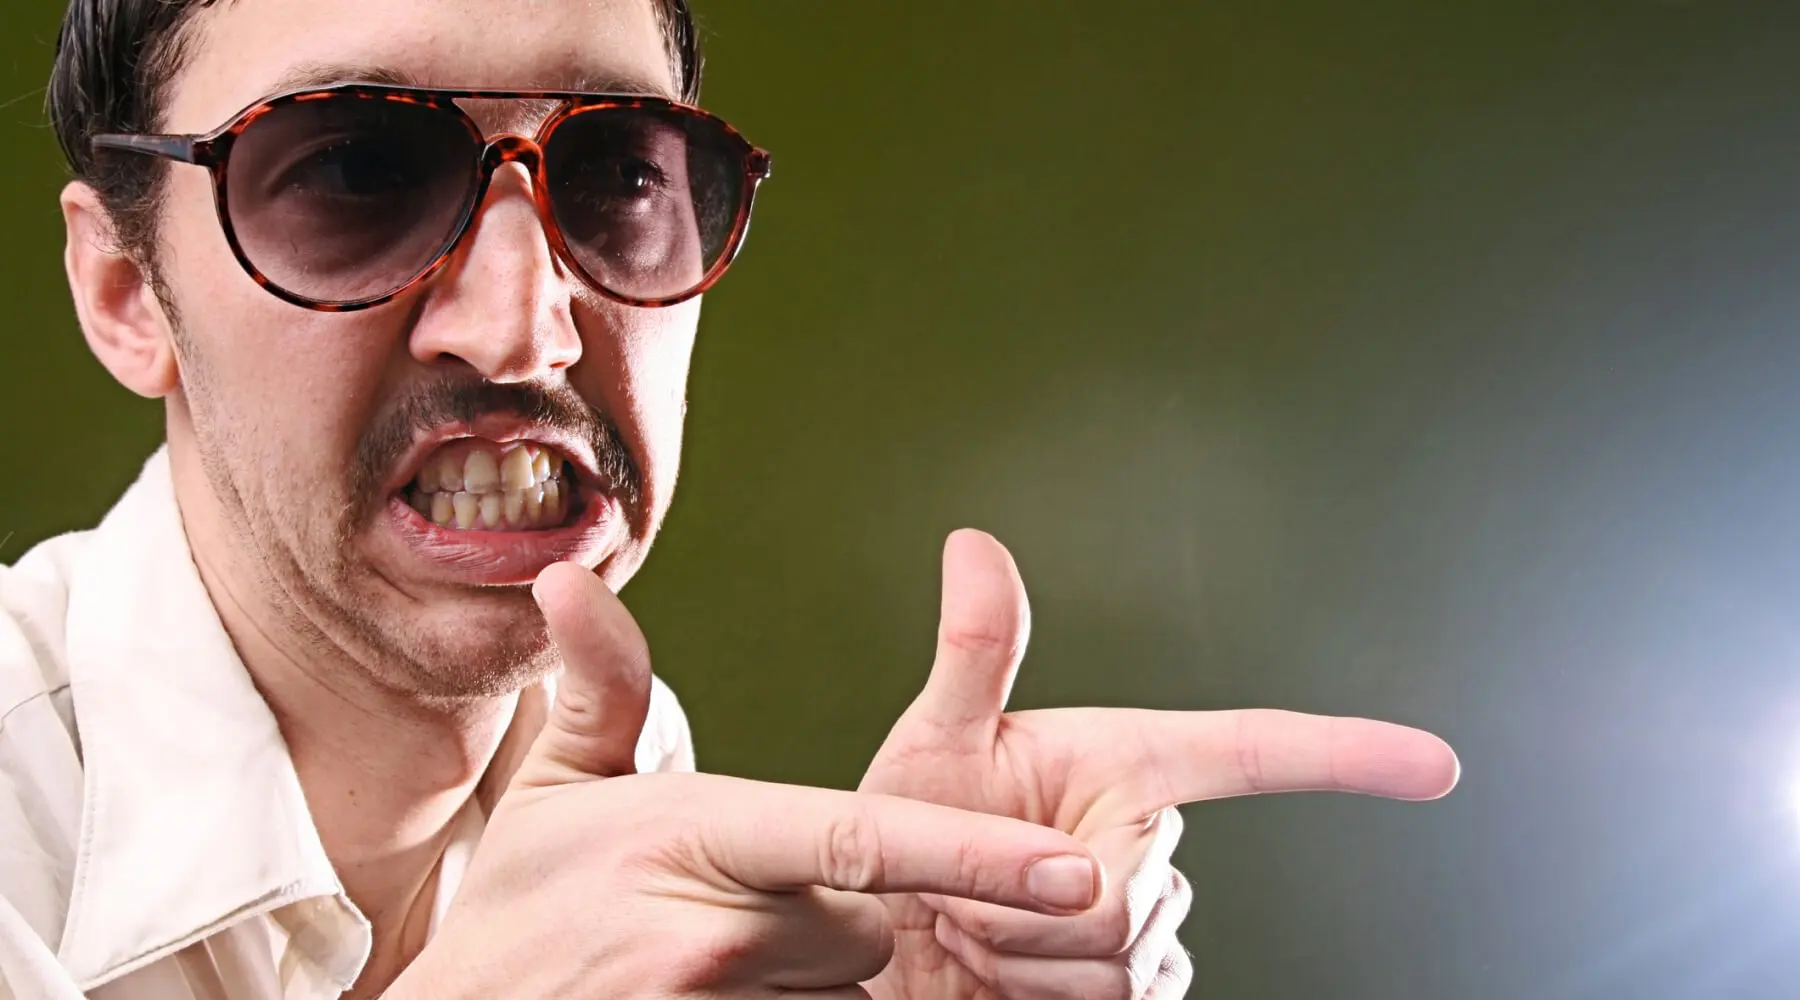 A man wearing sunglasses pointing directly at the camera